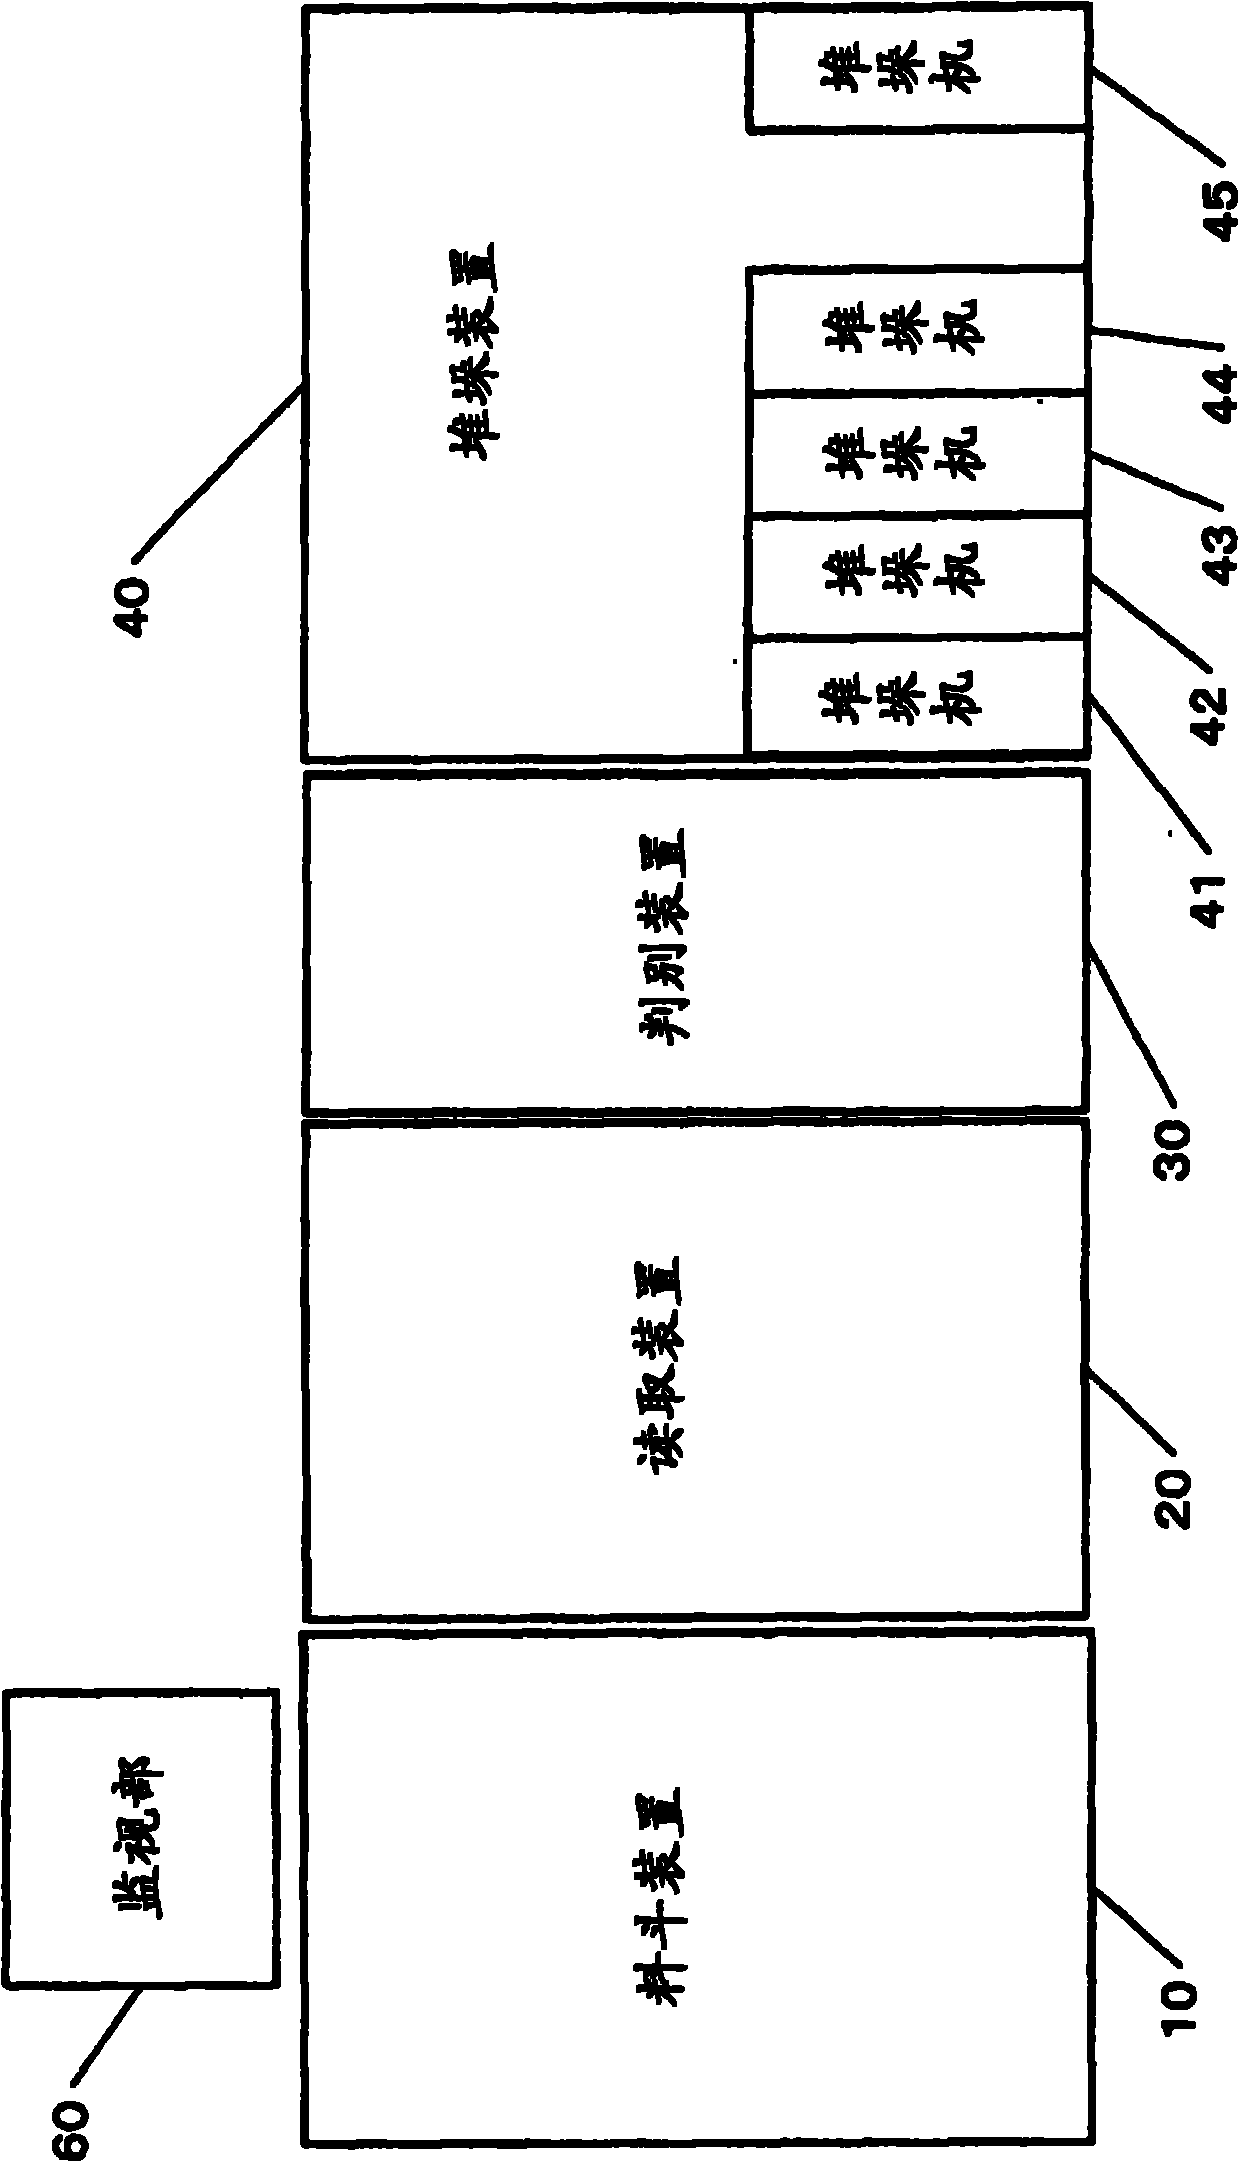 Document delivery apparatus and method of controlling the same